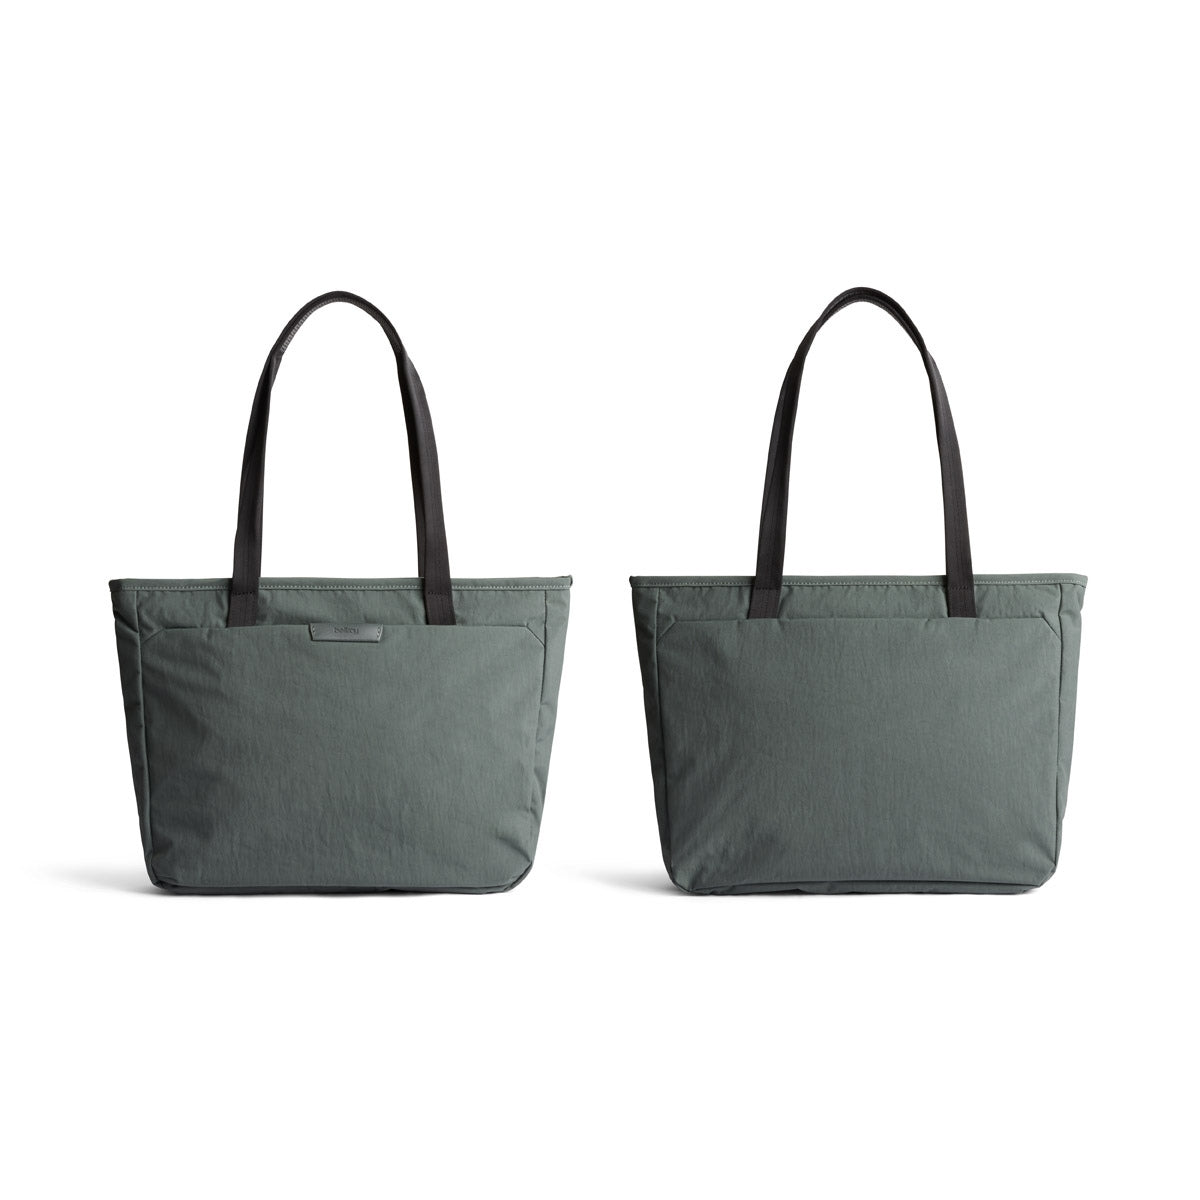 Bellroy Tokyo Tote Compact